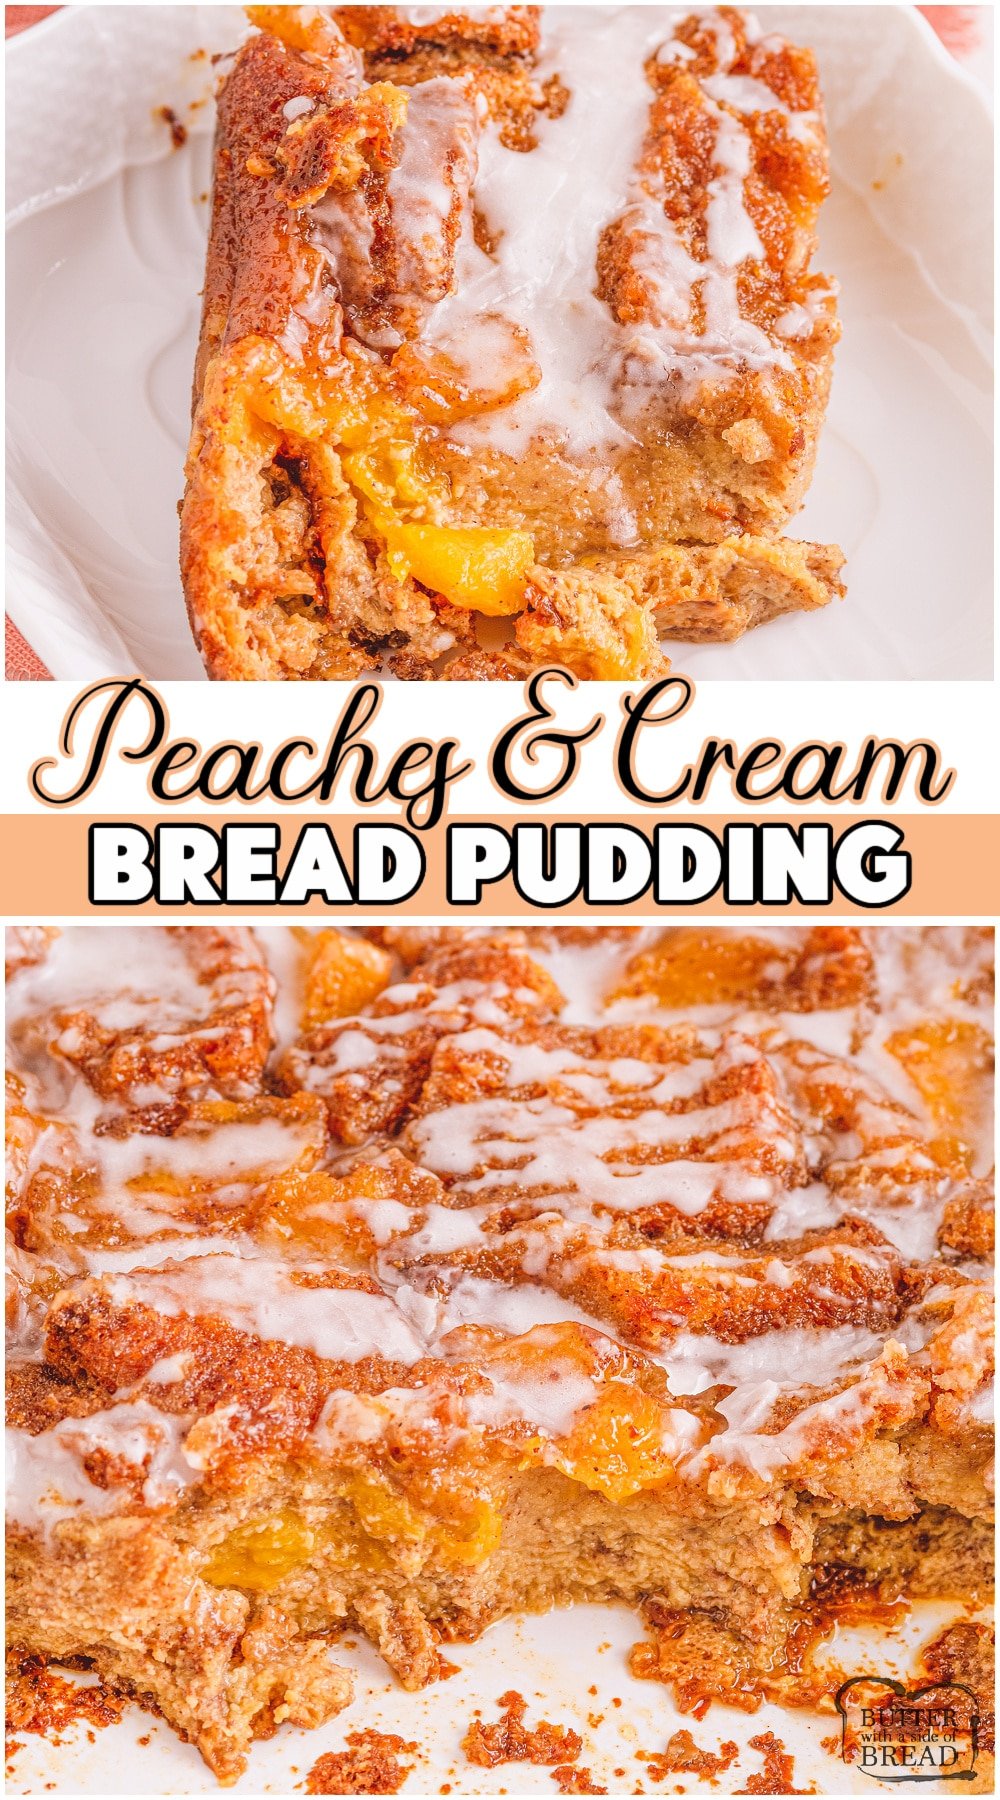 Peach bread pudding packed with fresh peaches, your favorite bread, & a homemade spiced custard! Easy bread pudding recipe that comes together fast and has incredible flavor! #breadpudding #dessert #peach #baking #pudding #easyrecipe from BUTTER WITH A SIDE OF BREAD